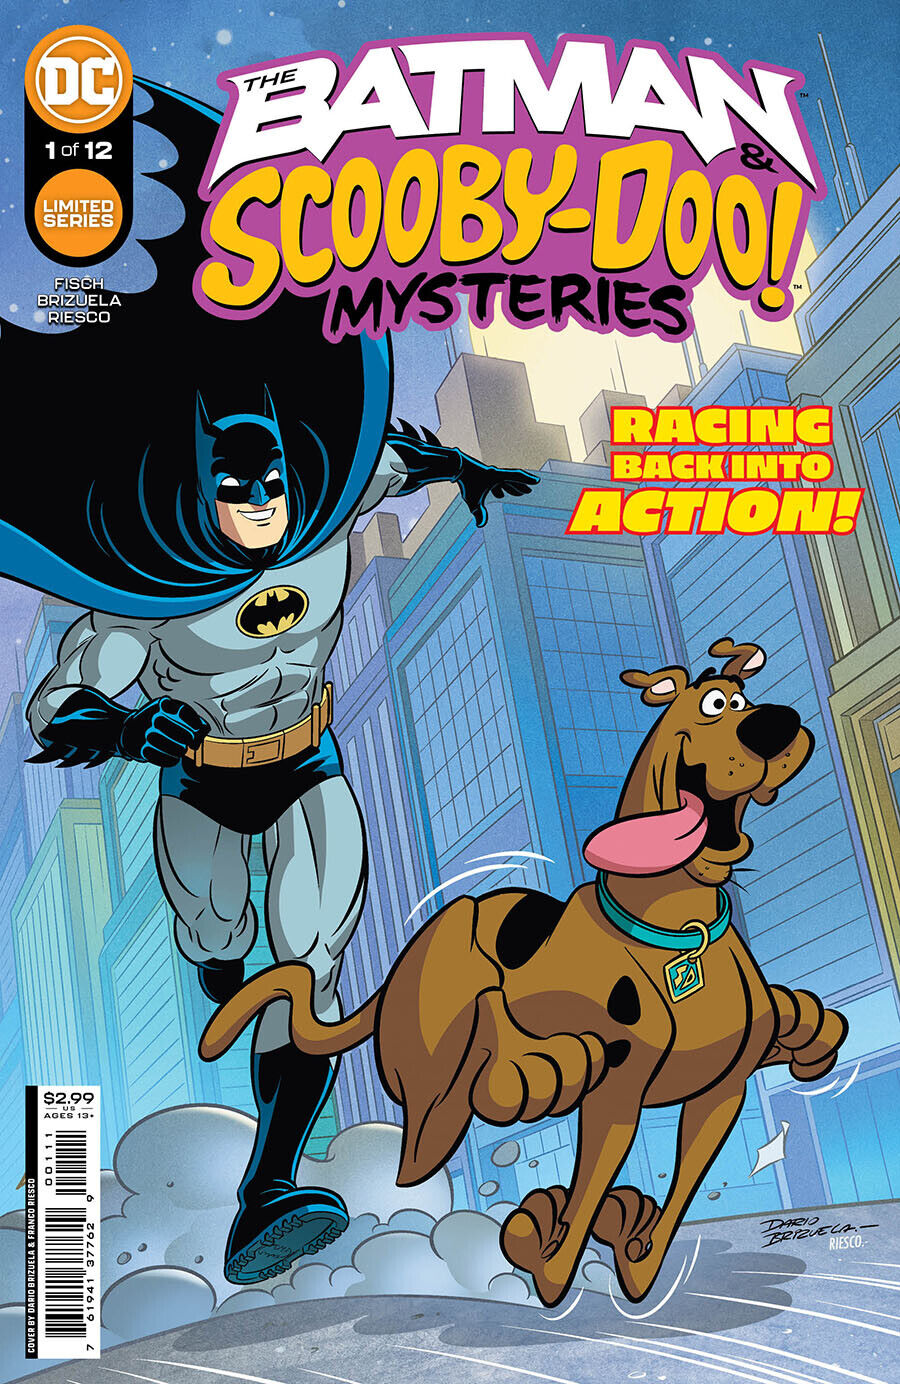 Batman & Scooby Doo Mysteries # 1 2 3 4 5 6 7 8 Cover YOU CHOOSE 2021 - 2024